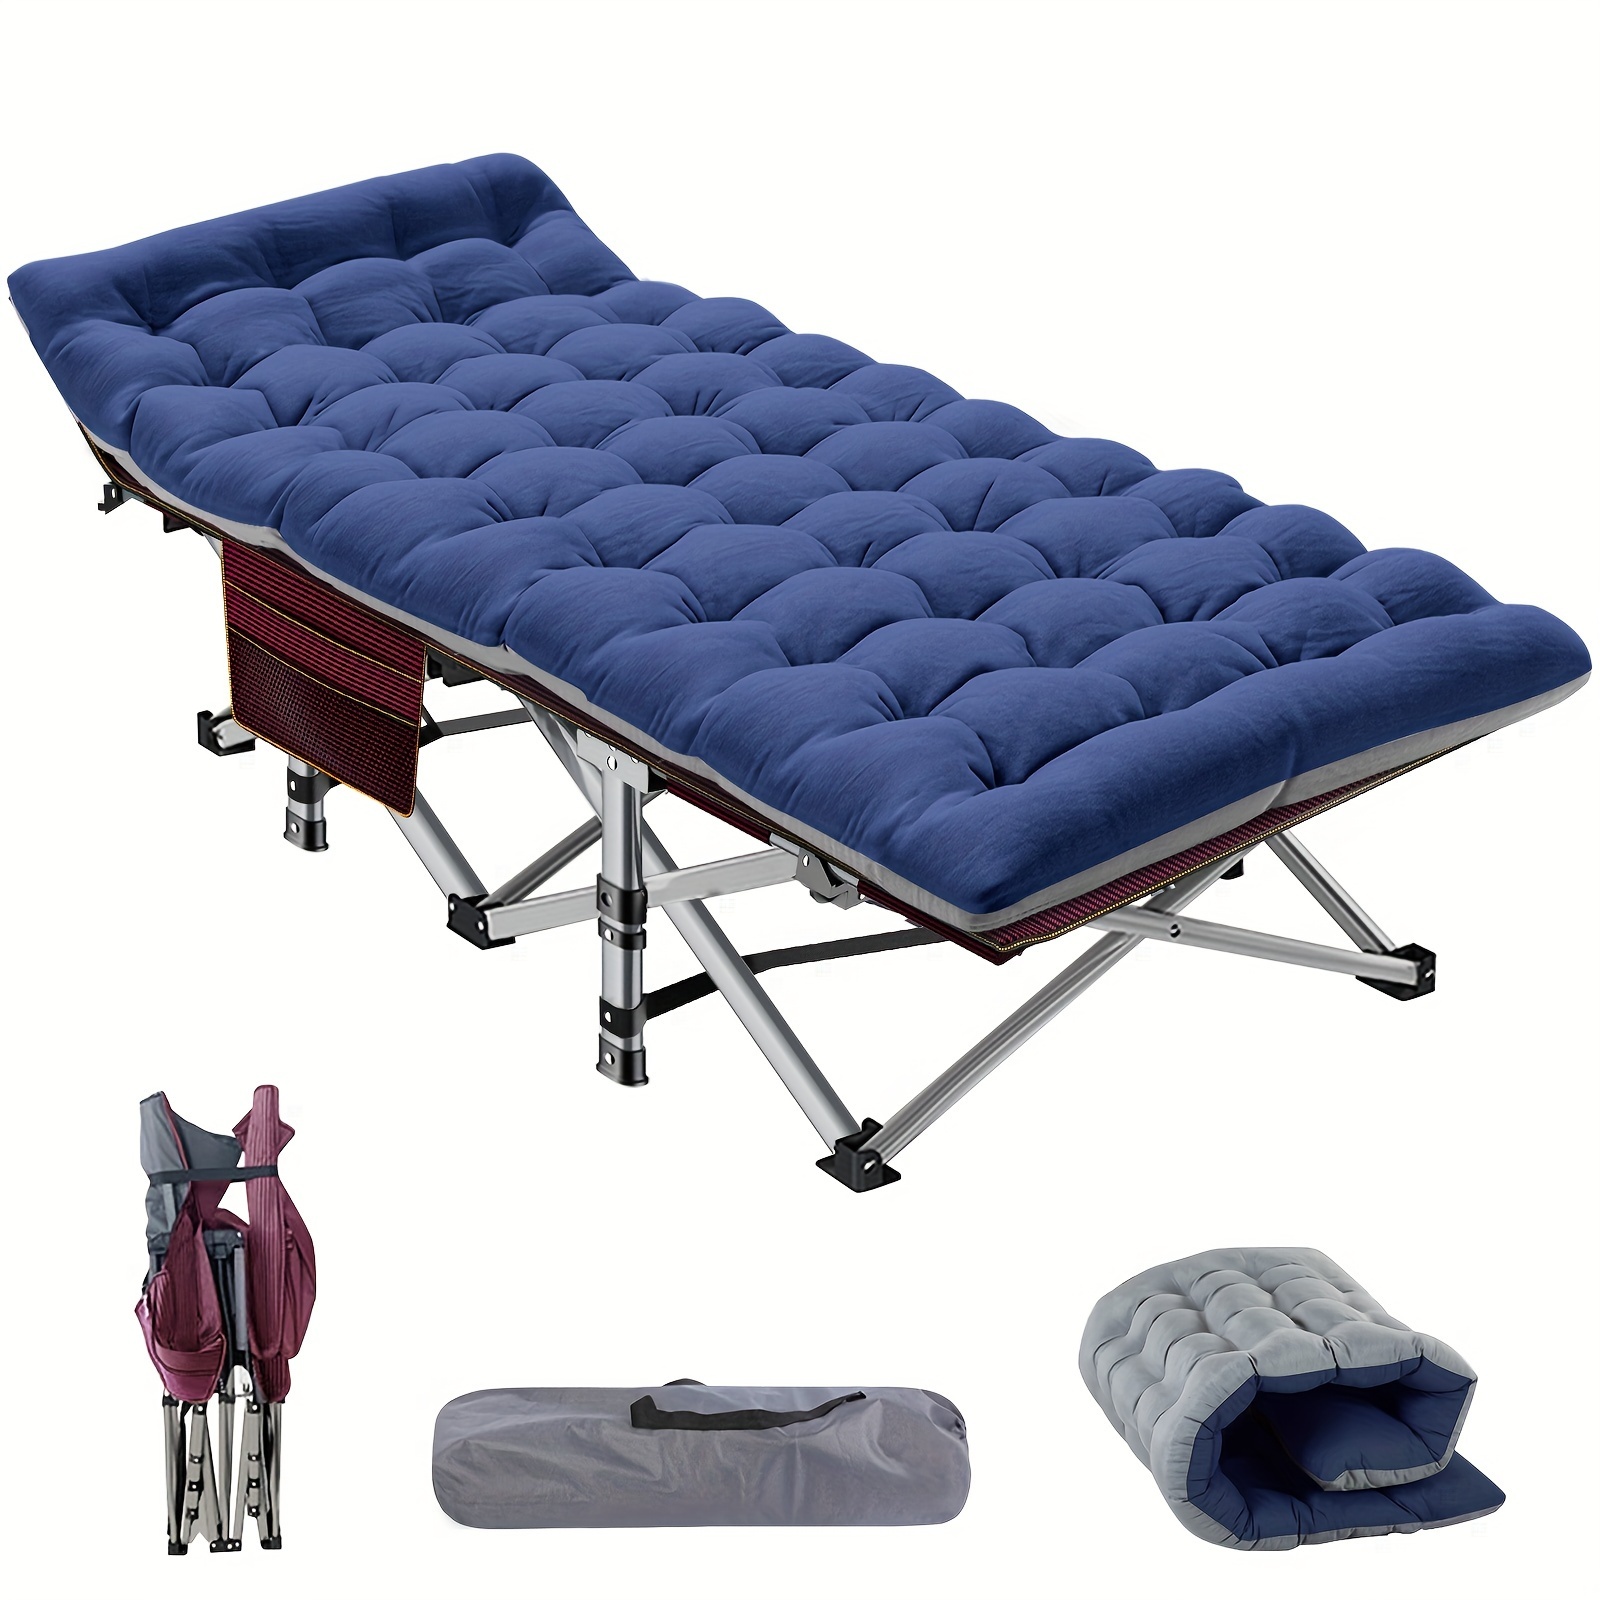 

Lilypelle Folding Camping Cot, Heavy Duty Sleeping Bed With Carry Bag, Double Layer Oxford Portable Travel Camp Cots, Rollaway Guest Bed Sleeping Cot, Blue